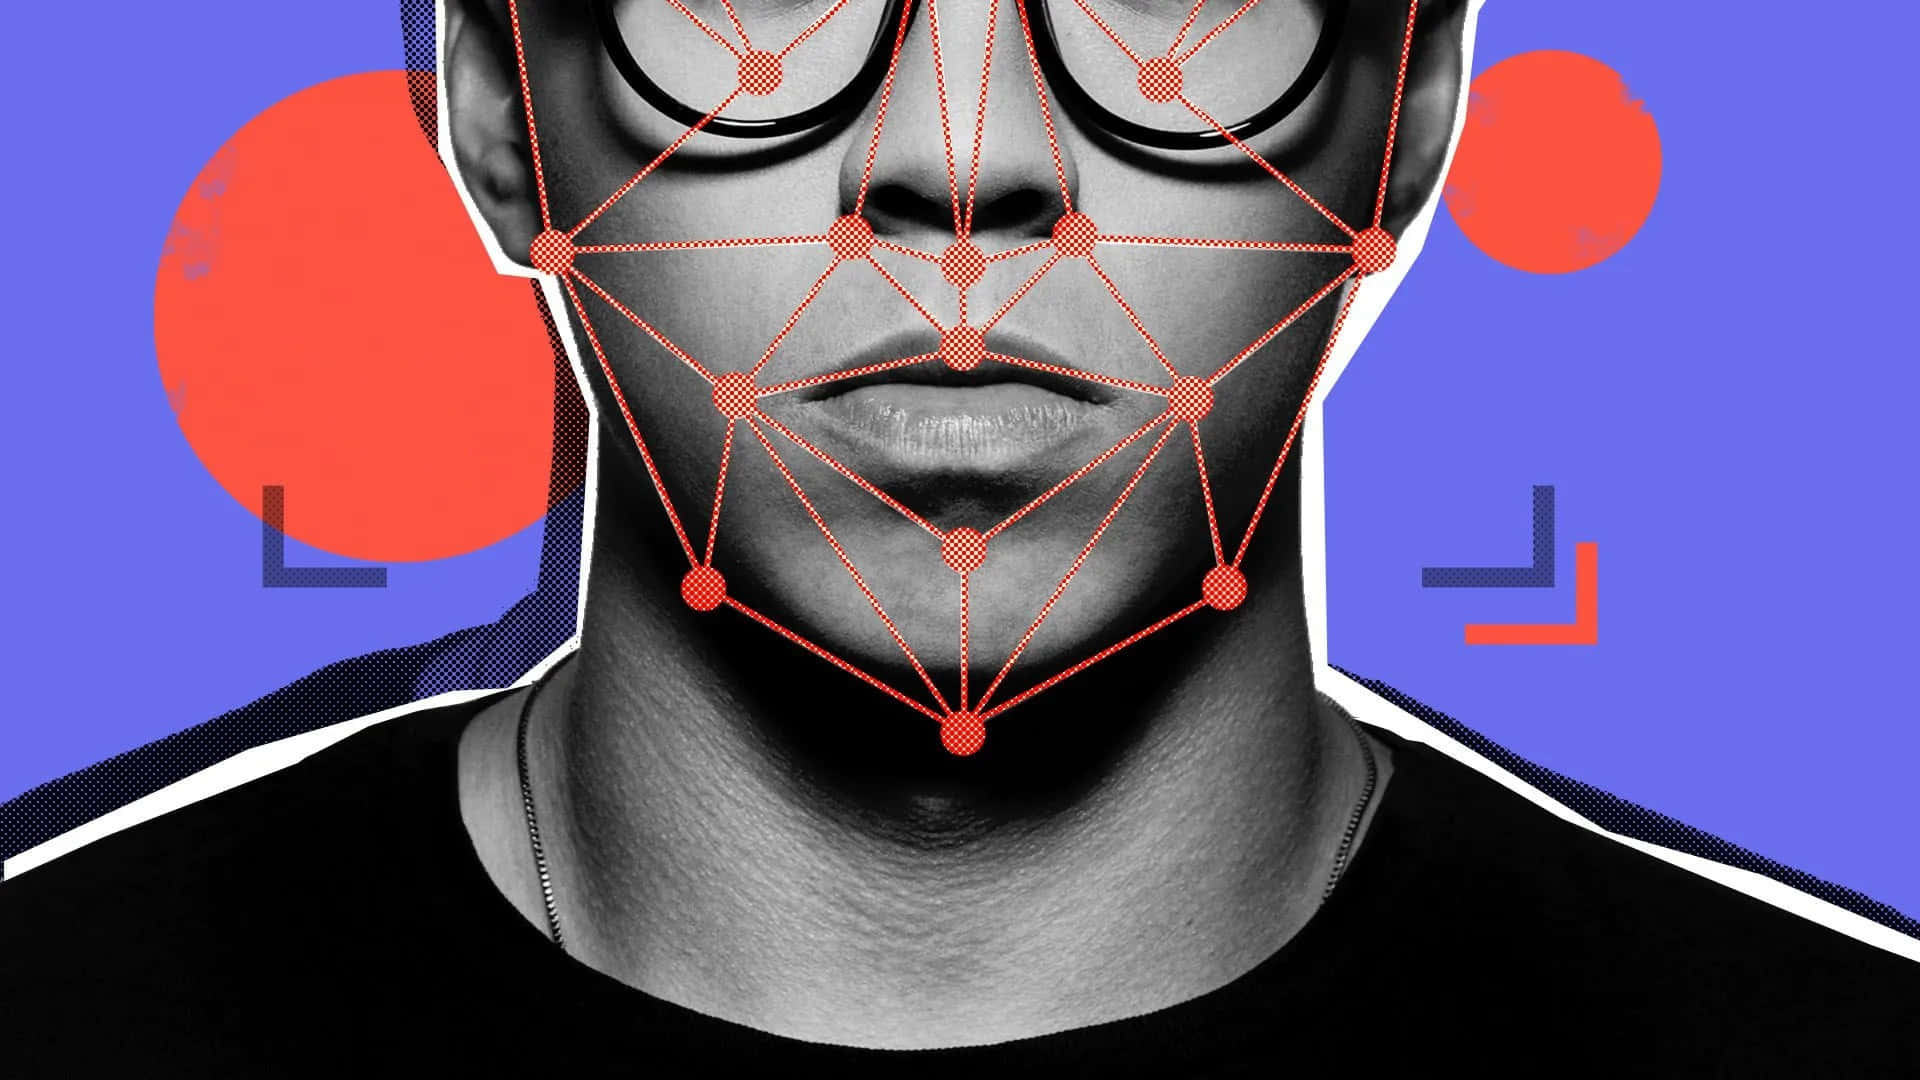 "The Future of Security: Face Recognition Technology" Wallpaper